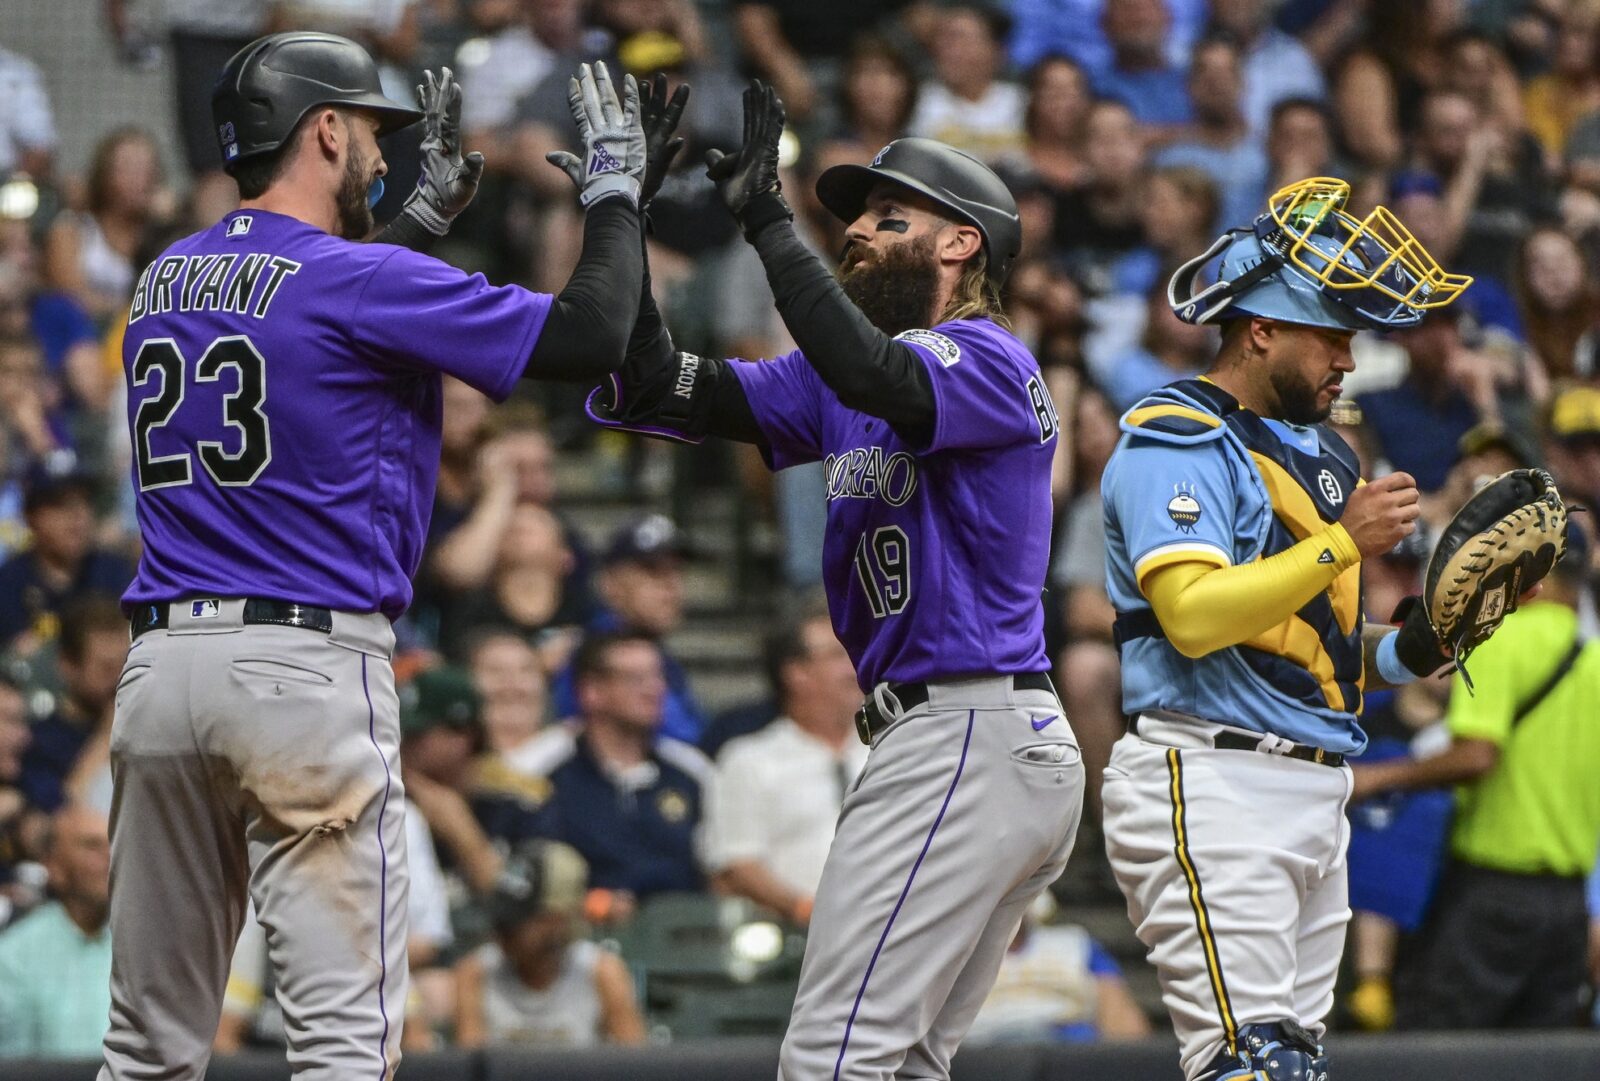 Kris Bryant hits first Coors Field home run with Rockies since